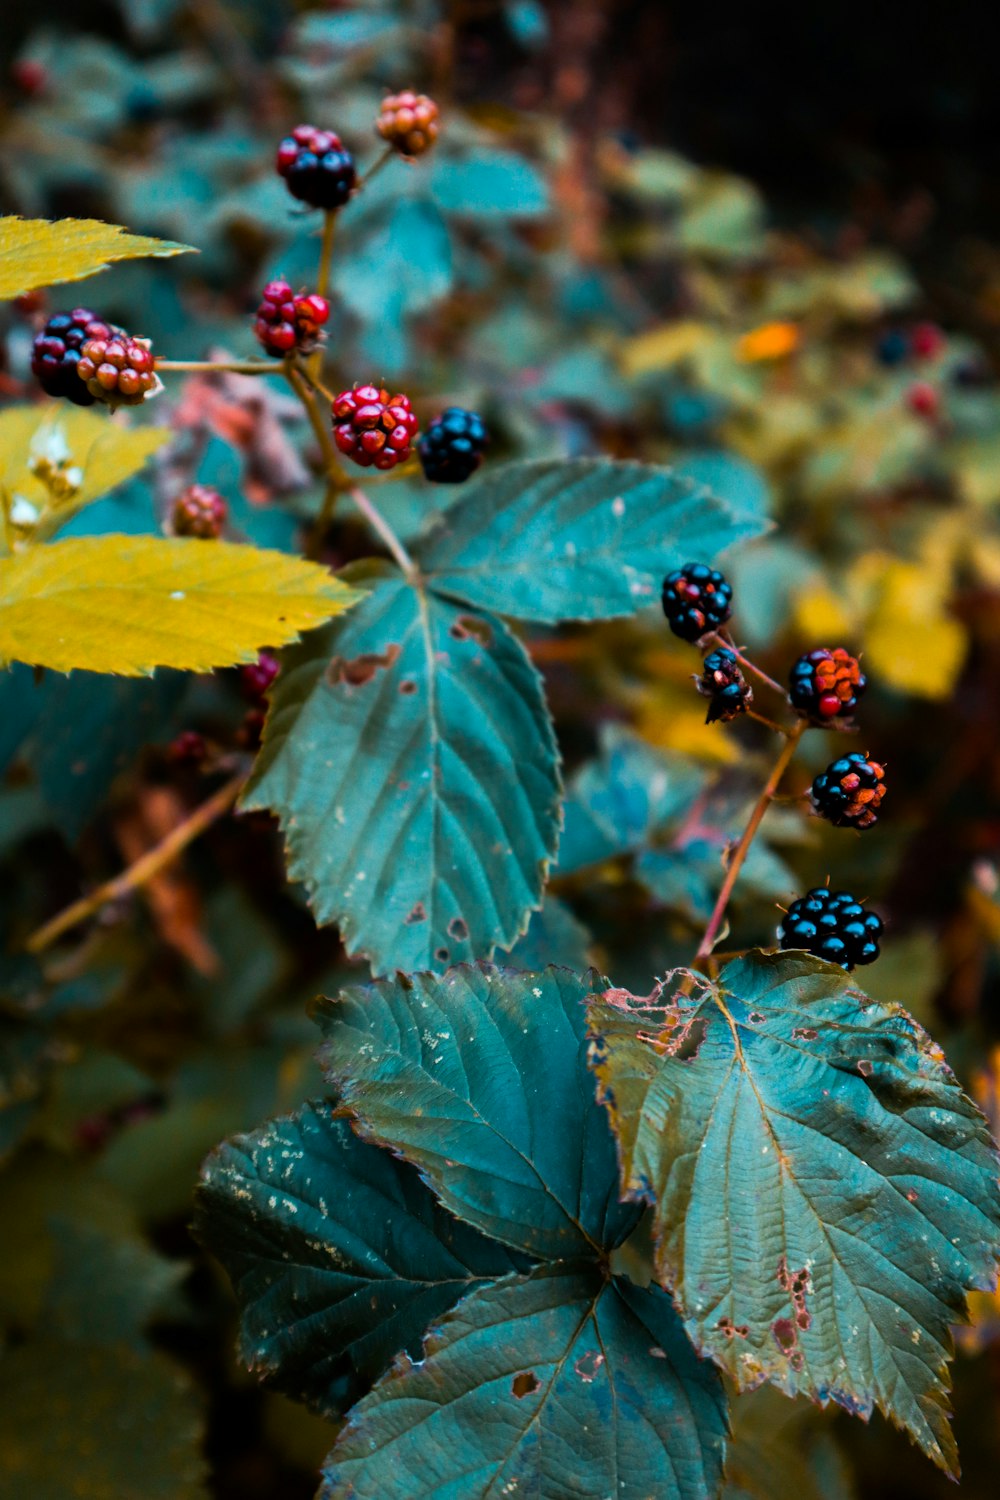 a close up of some berries